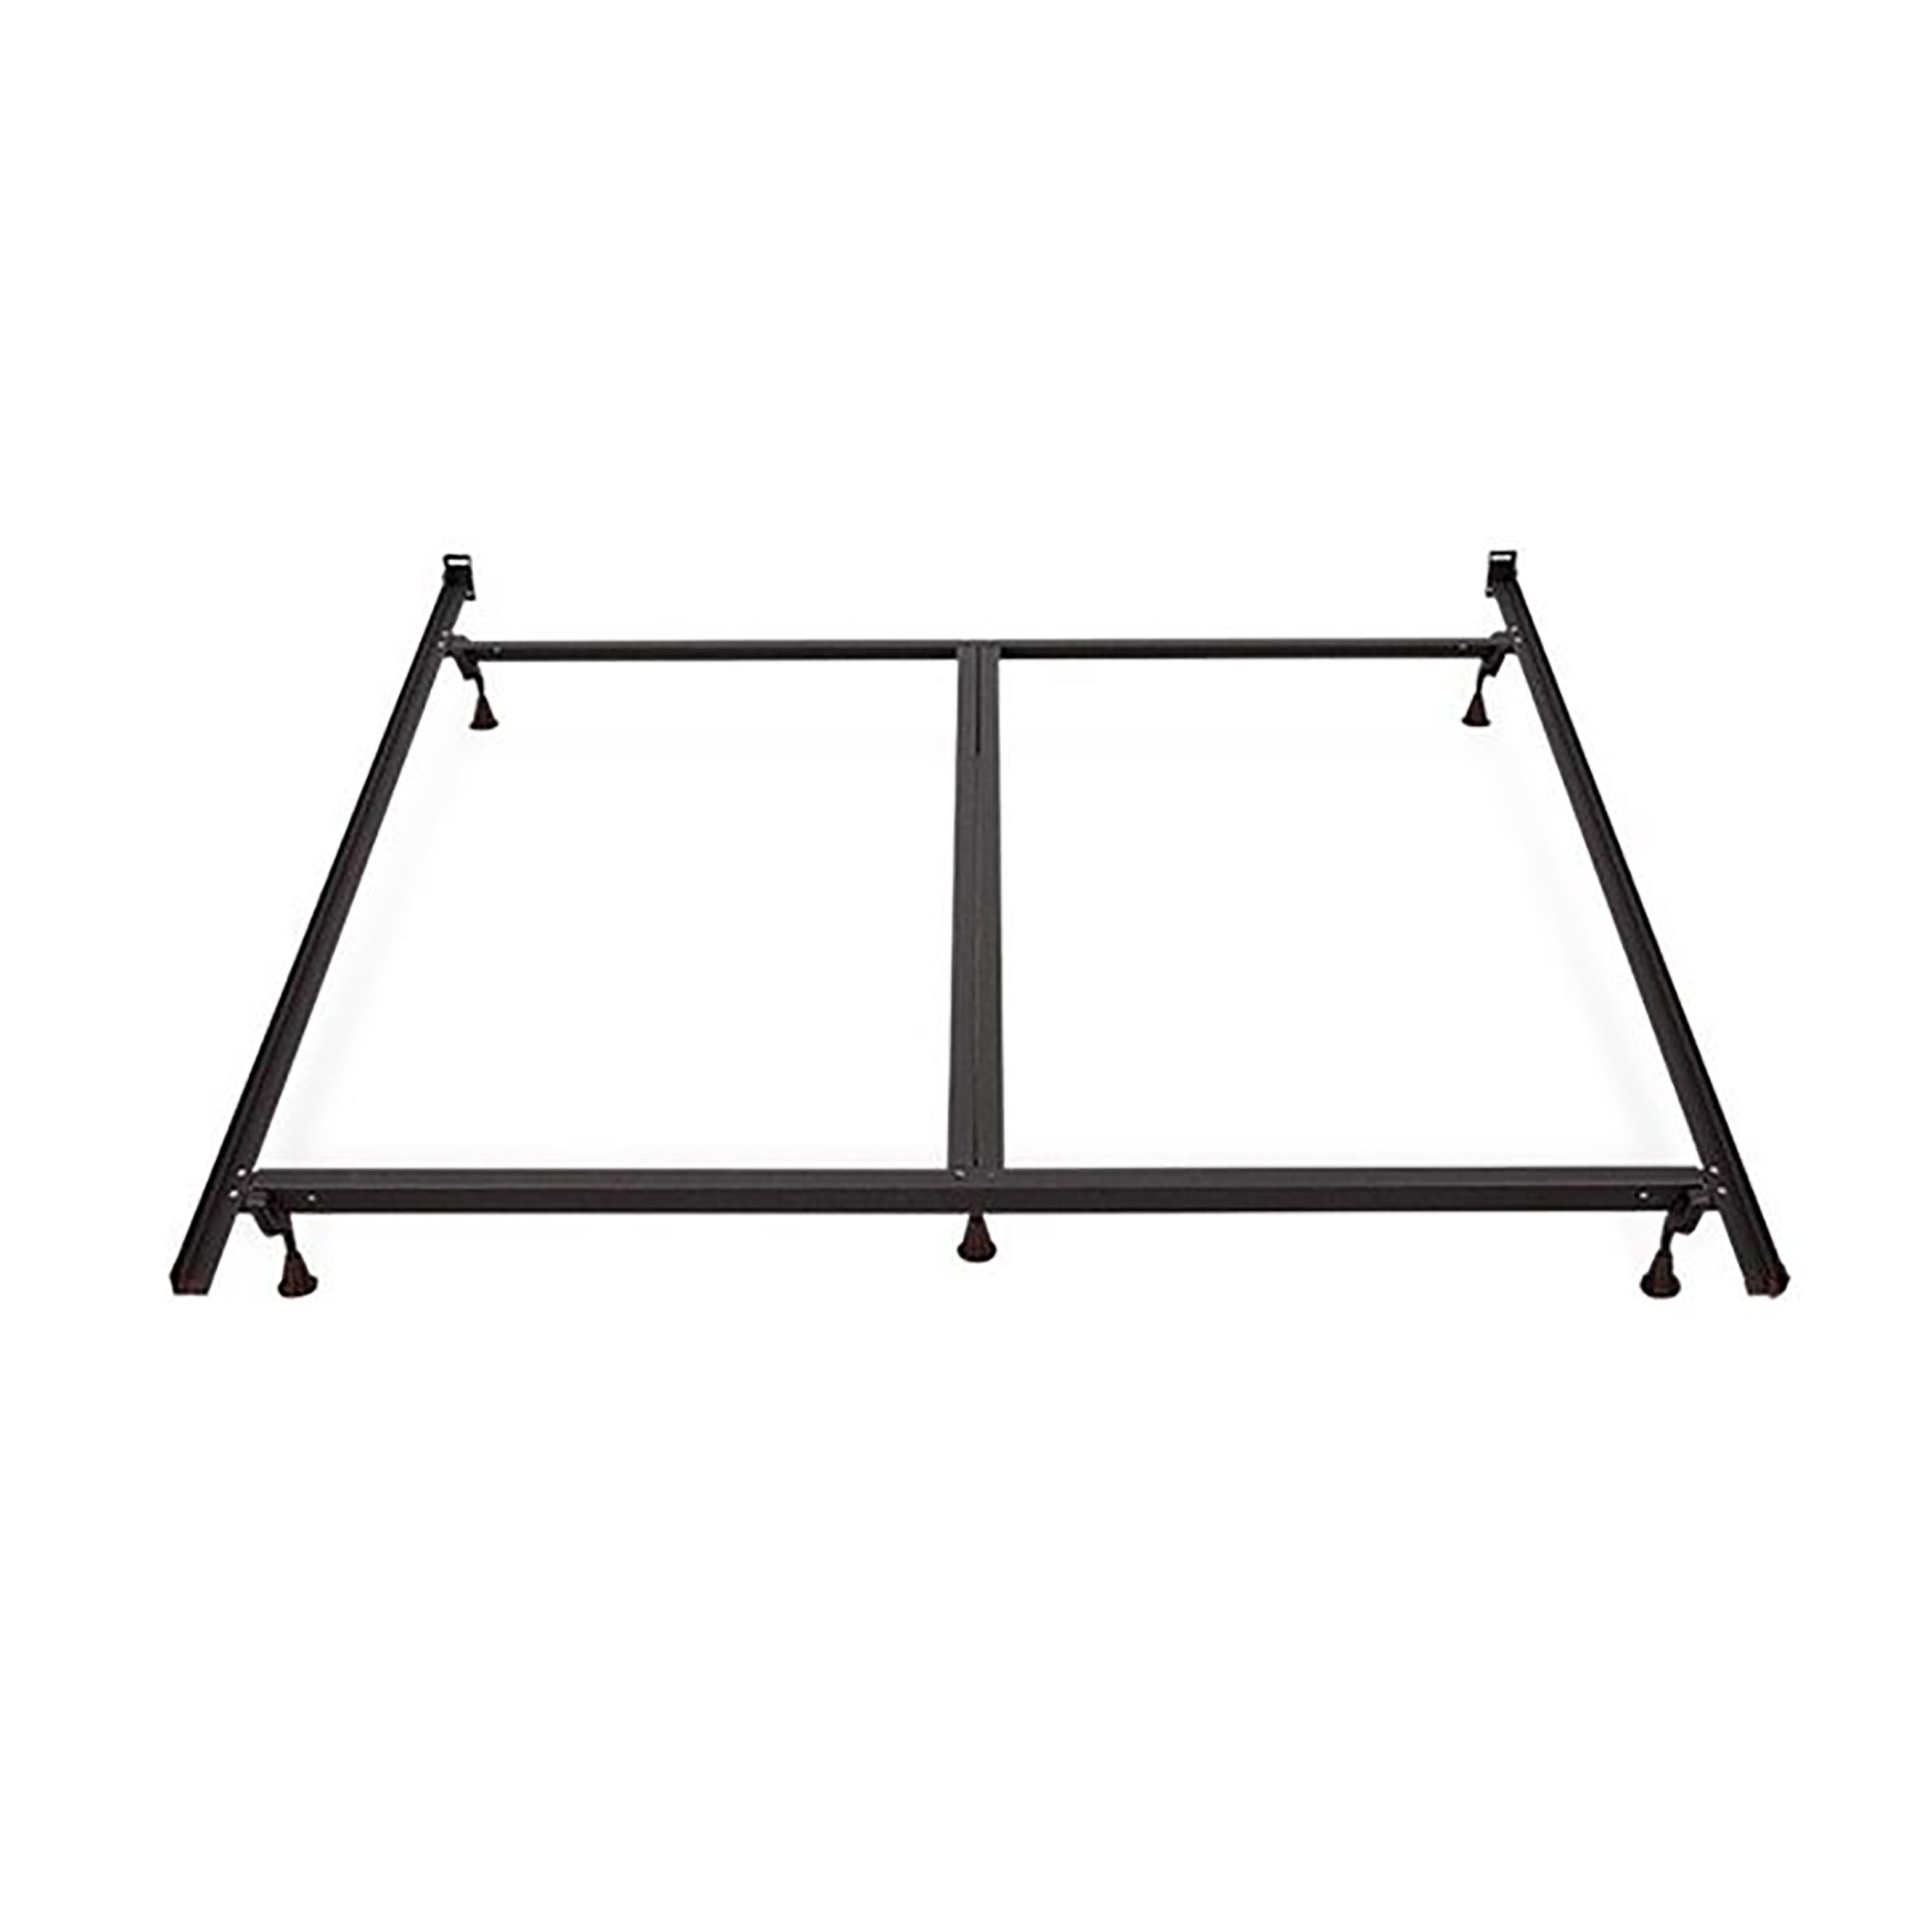 Bed Frame Medium Finish Bed Claw Heavy-Duty Hook-On 82 x 6 Replacement Queen/King Wood Bed Side Rails